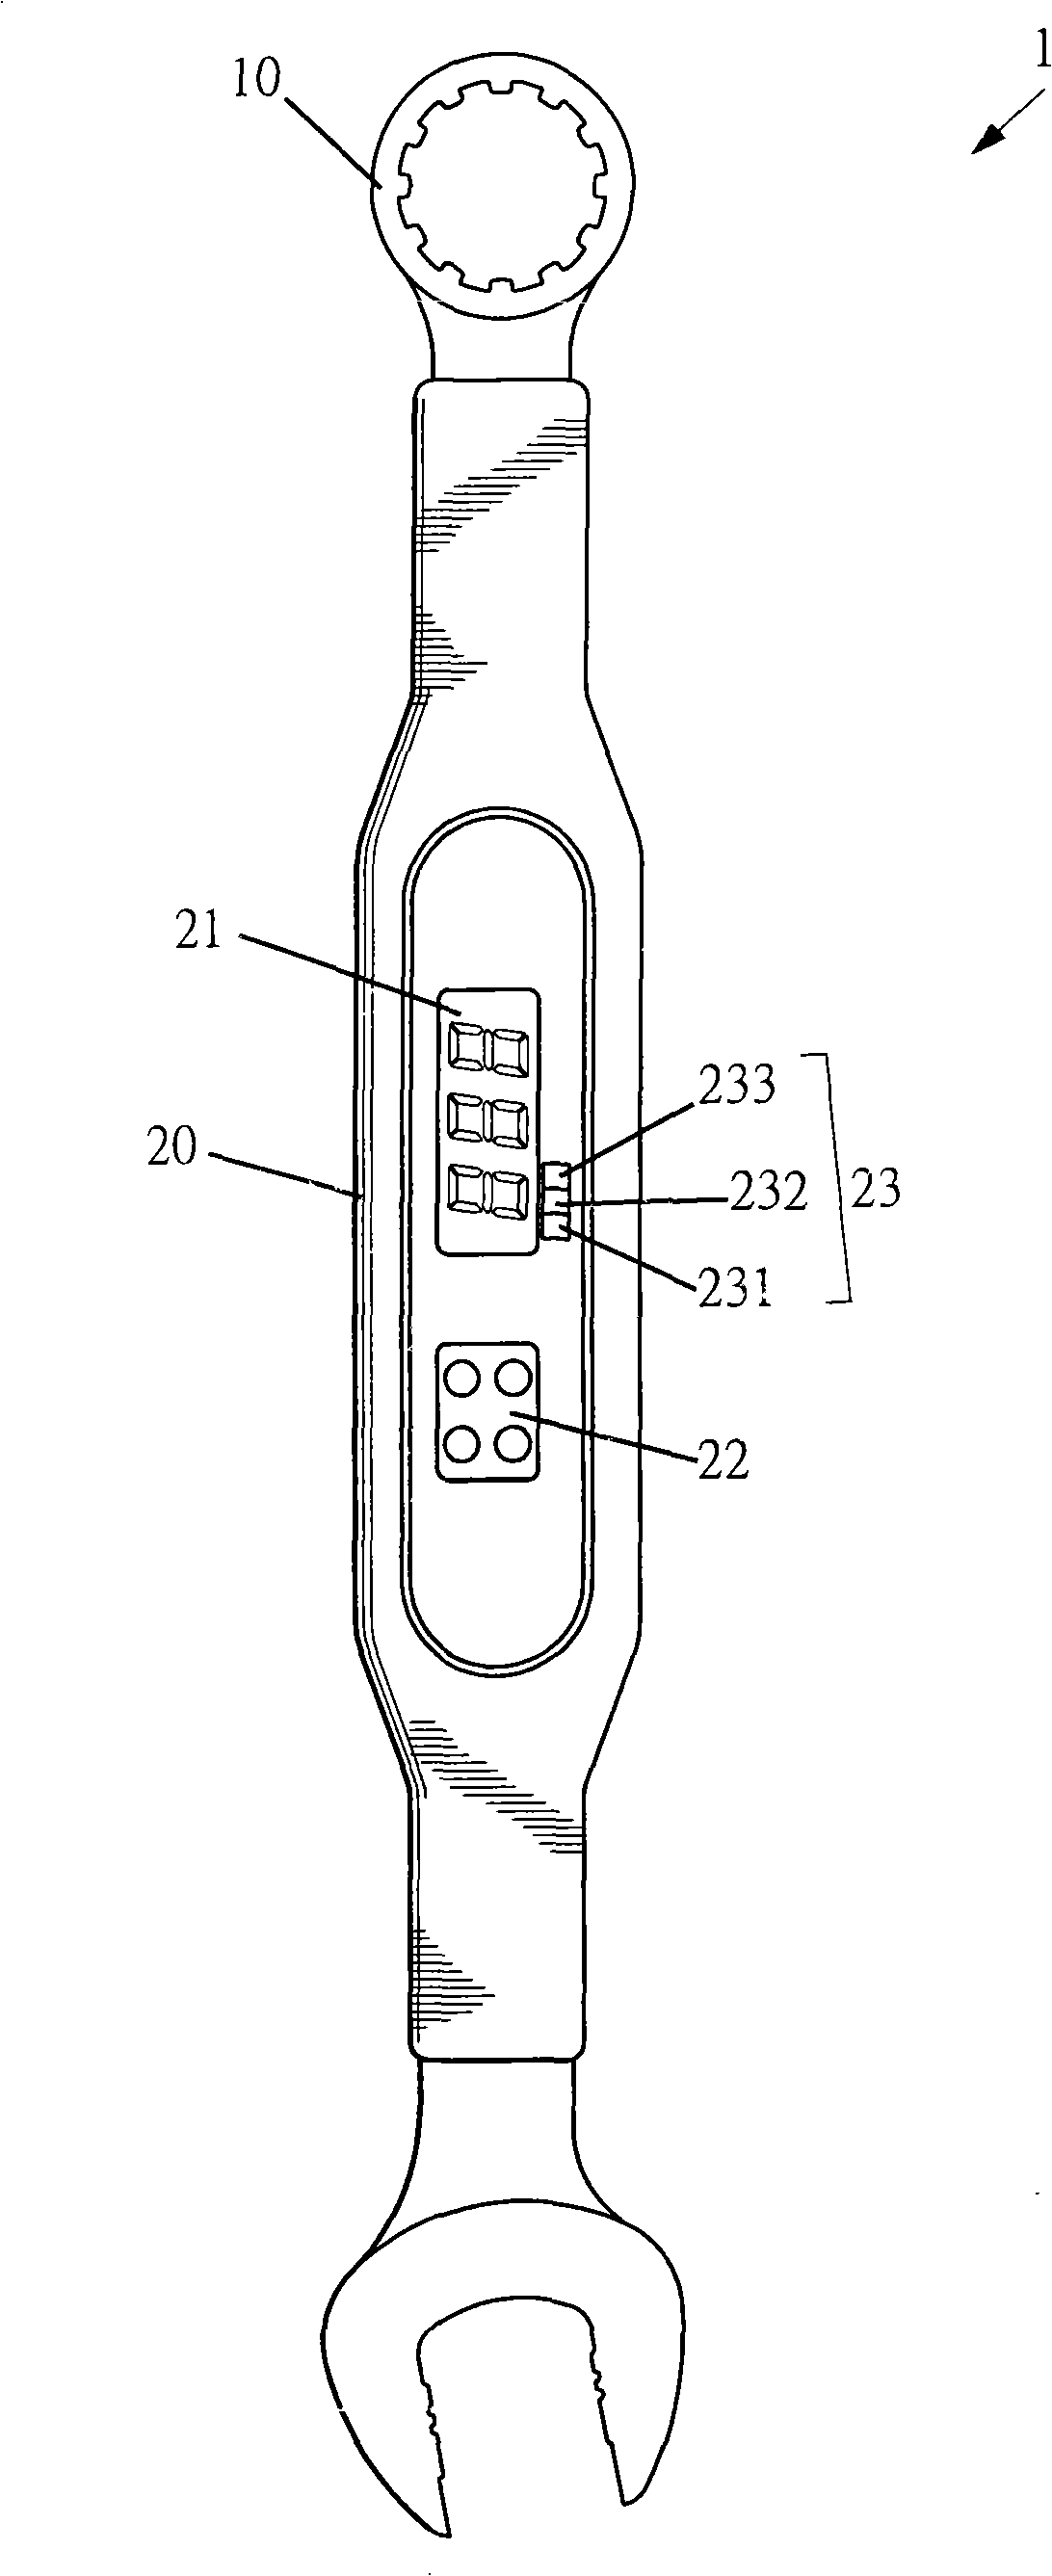 Wrench display setting device